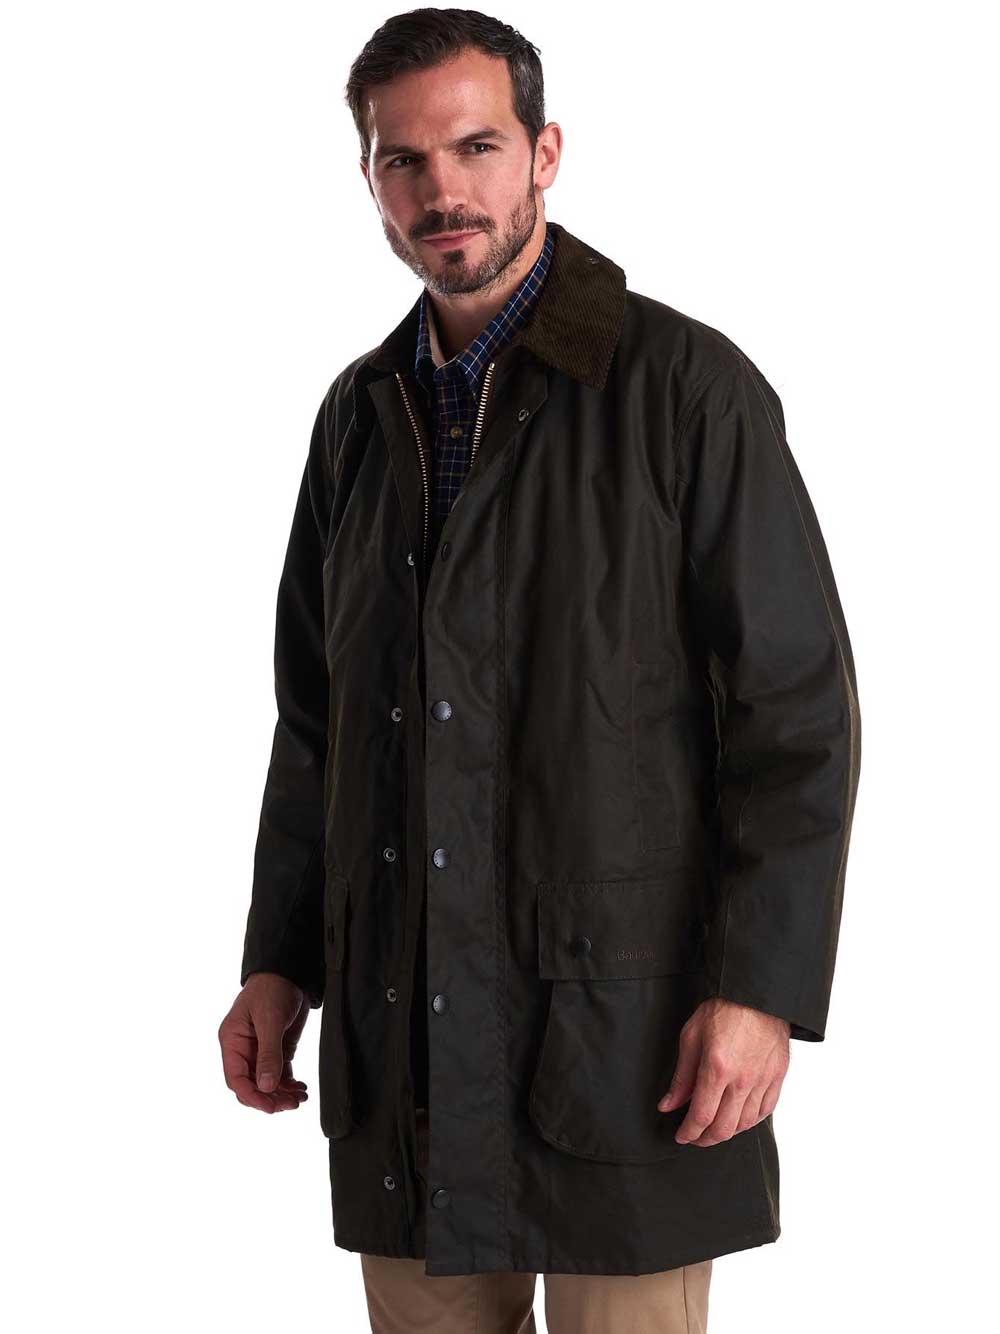 BARBOUR Wax Jacket - Mens Northumbria Classic 8oz Sylkoil - Olive